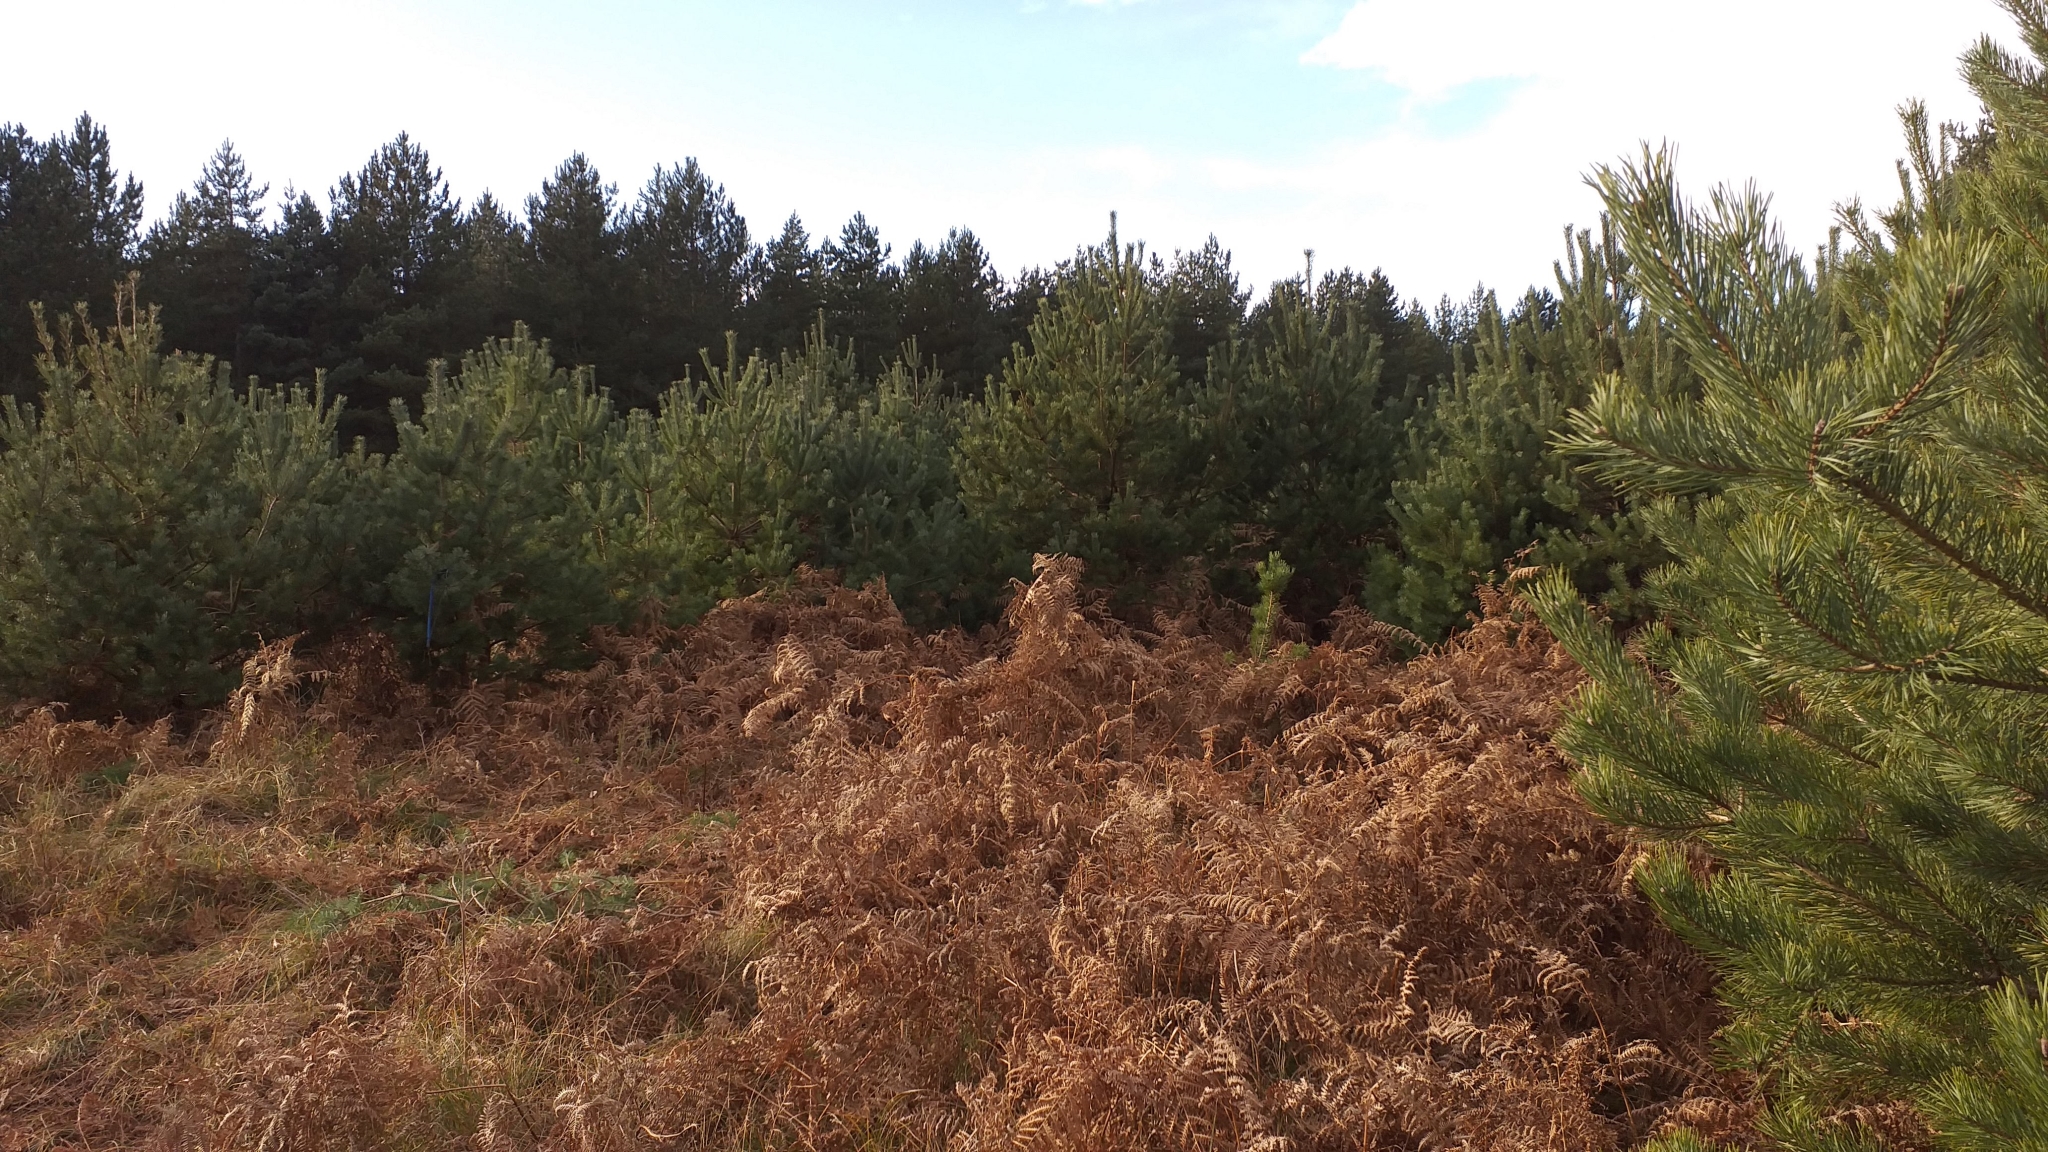 A photo from the FoTF Conservation Event - December 2019 - Self Seeded Pine Tree Removal on the Goshawk Trail : A view from the Goshwak Trail